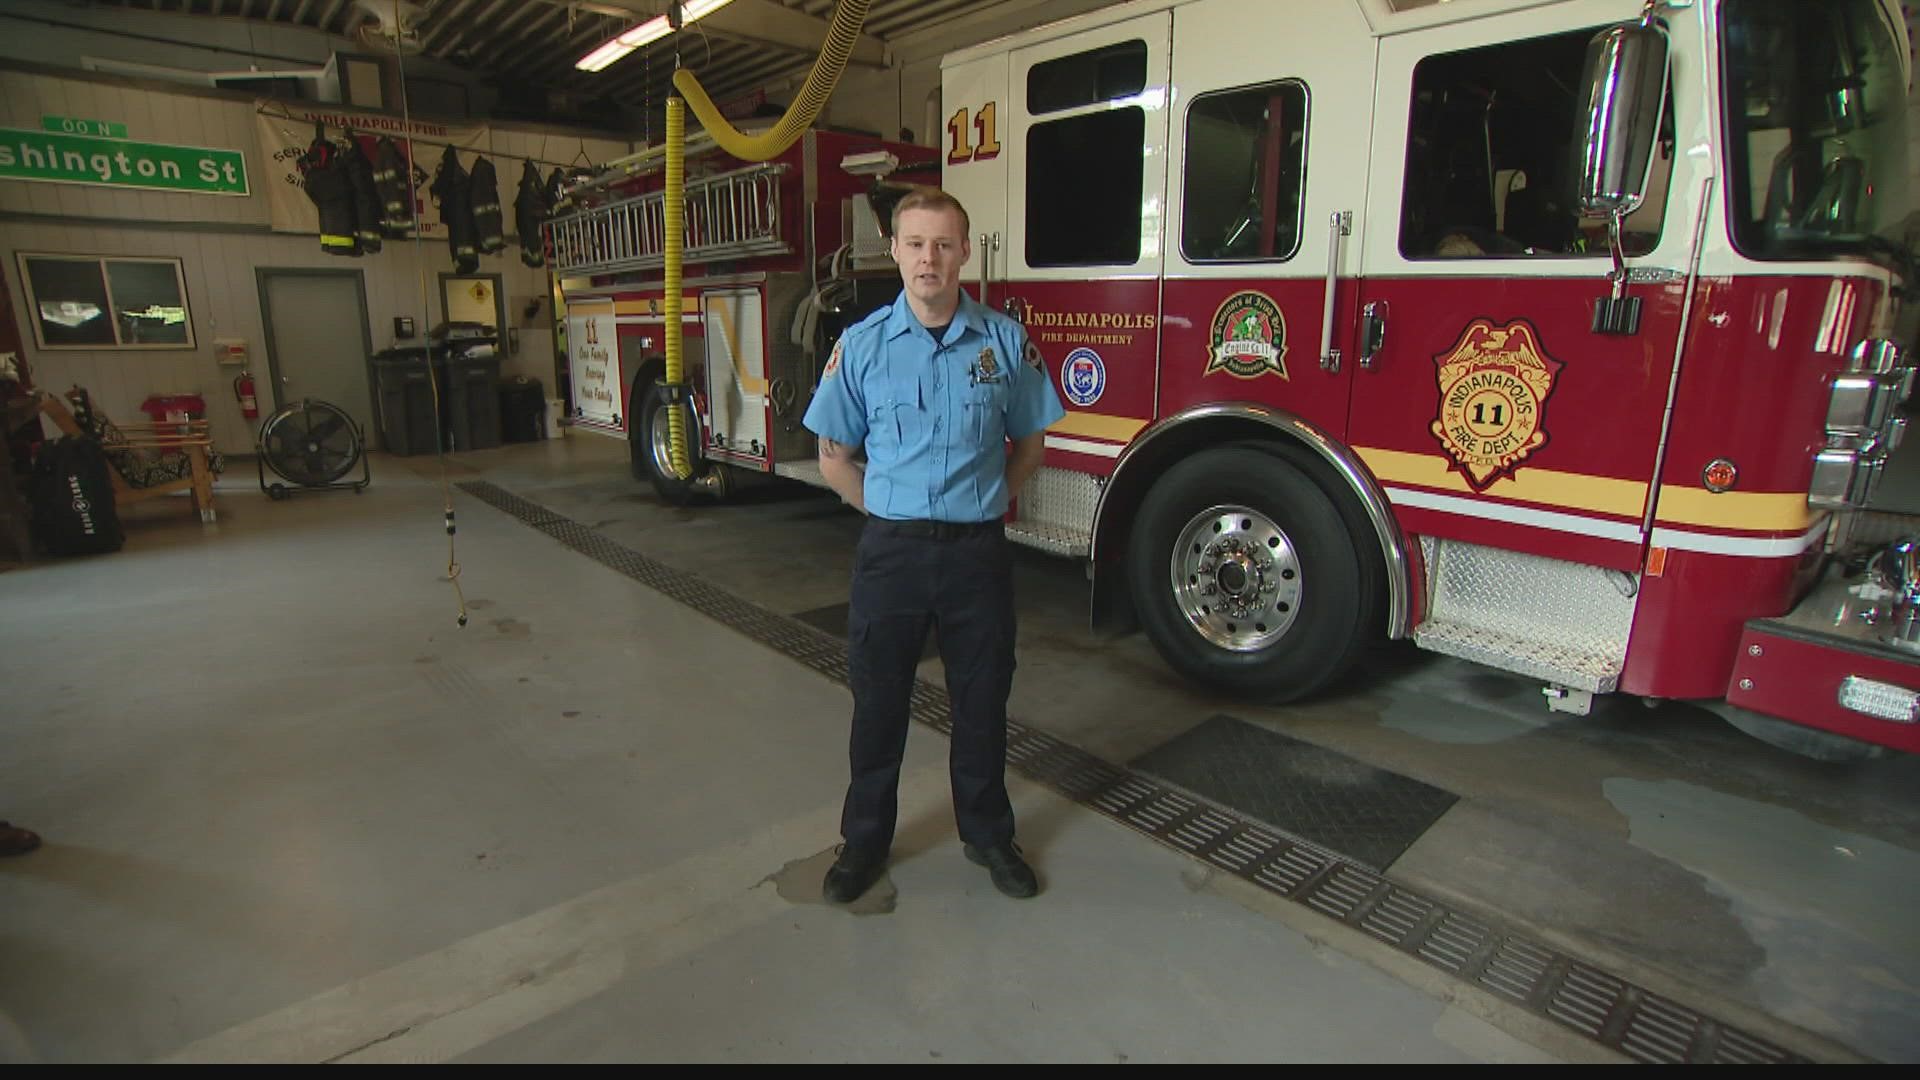 John Sego's journey went from burn survivor to firefighter, thanks to the experiences he gained and mentors he met at Hoosier Burn Camp